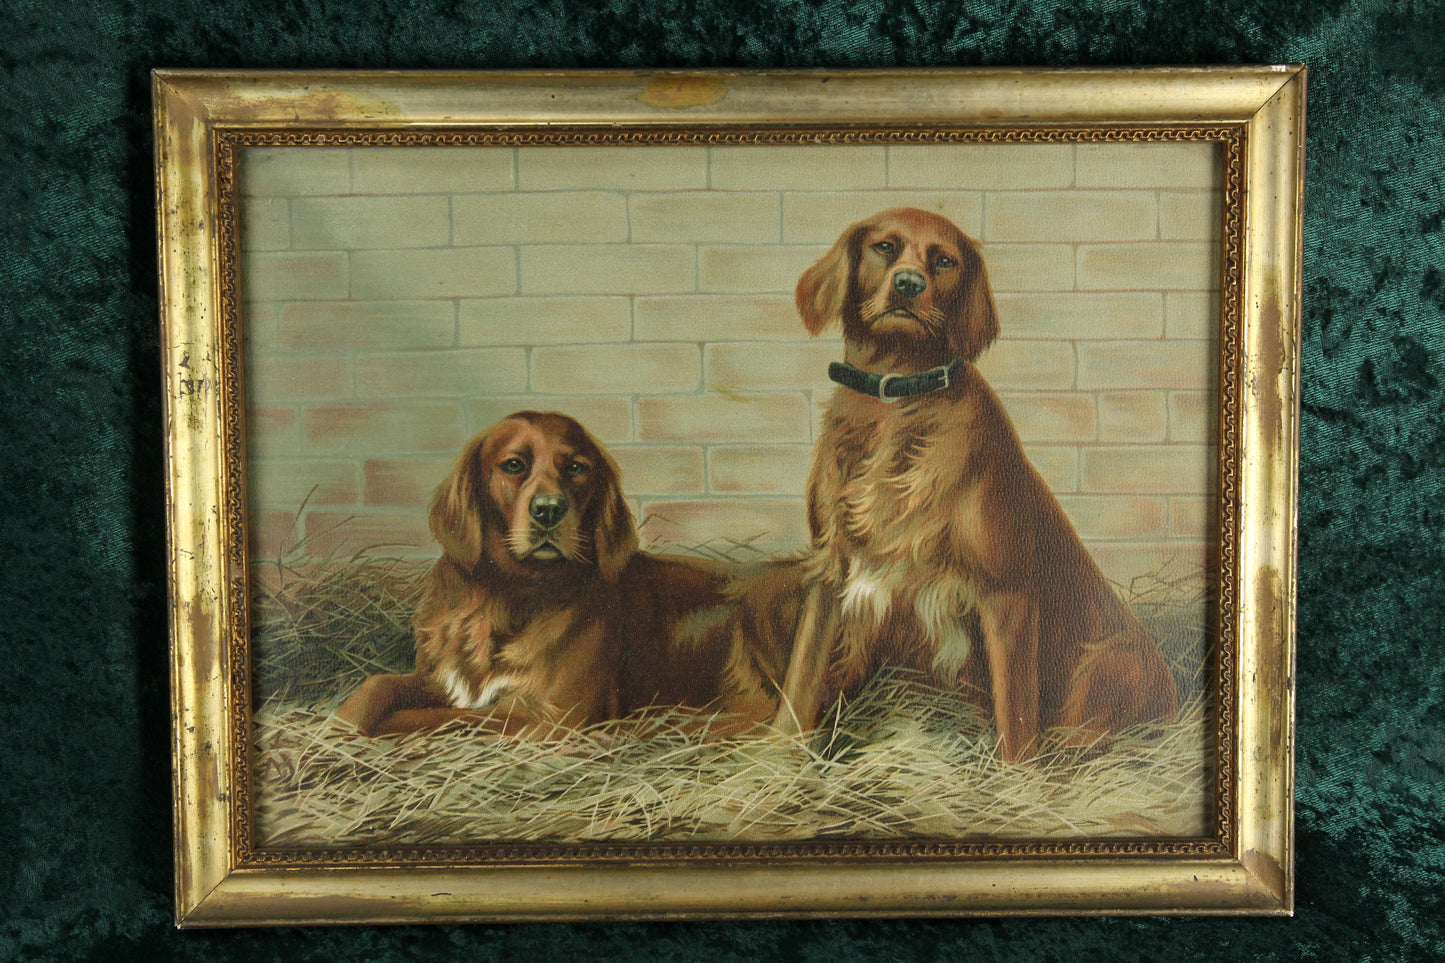 Folky Print of Two Dogs With Victorian Trade Card It Was Based On